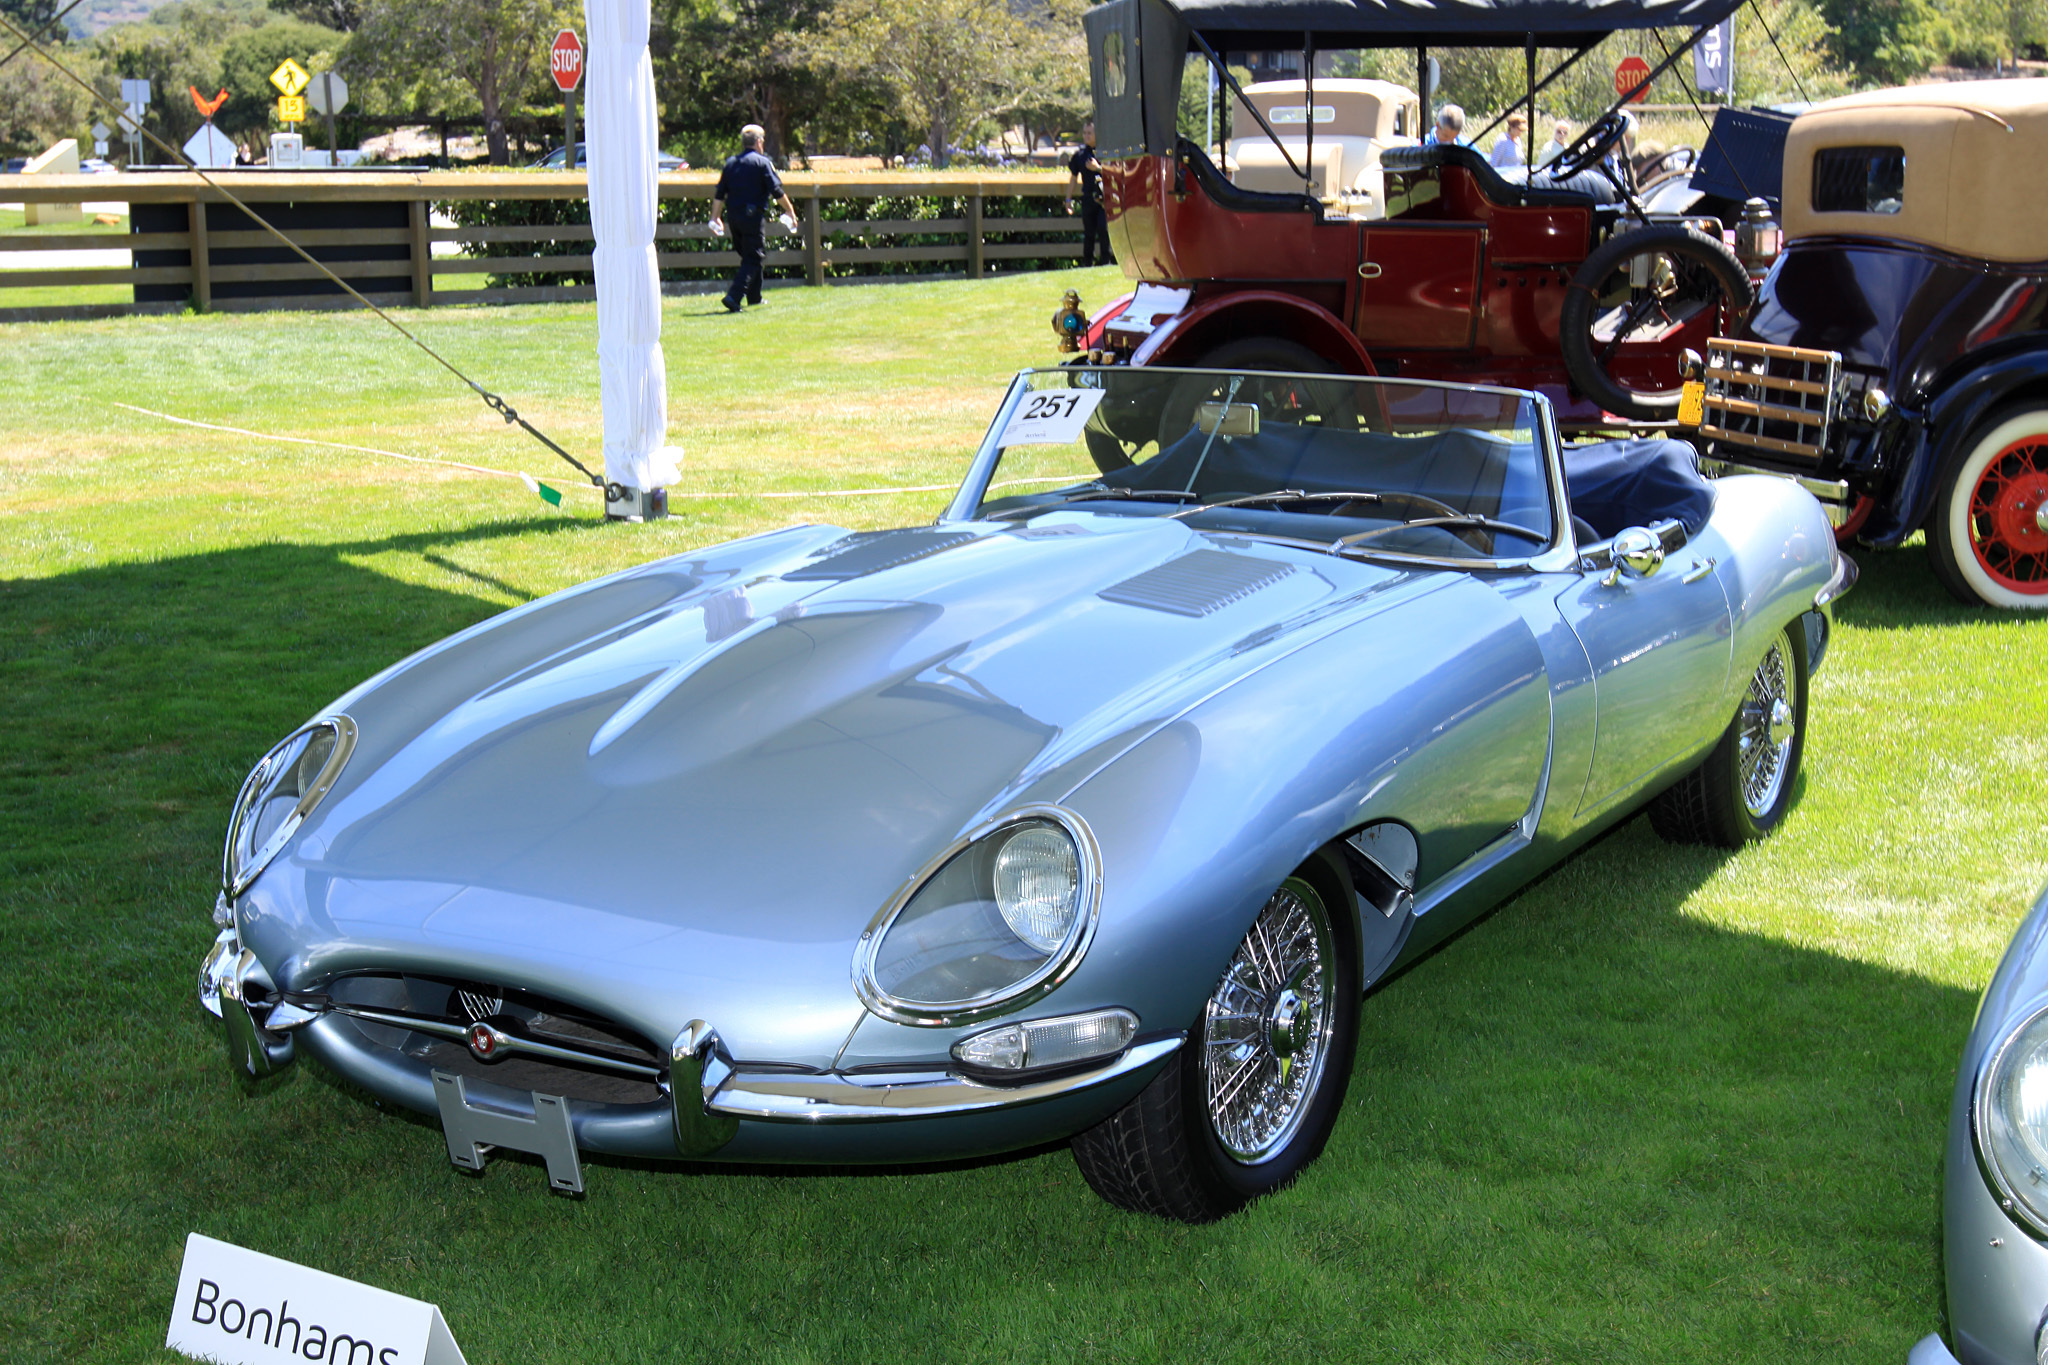 1964 Jaguar E-Type 3.8 Roadster 880500 - sold for $148,500 at Bonhams. Matching numbers example. Scored 99.96 points in JCNA judging. Many past Concours awards.Restored by marque specialists. Offered with history file and Heritage Trust Certificate.